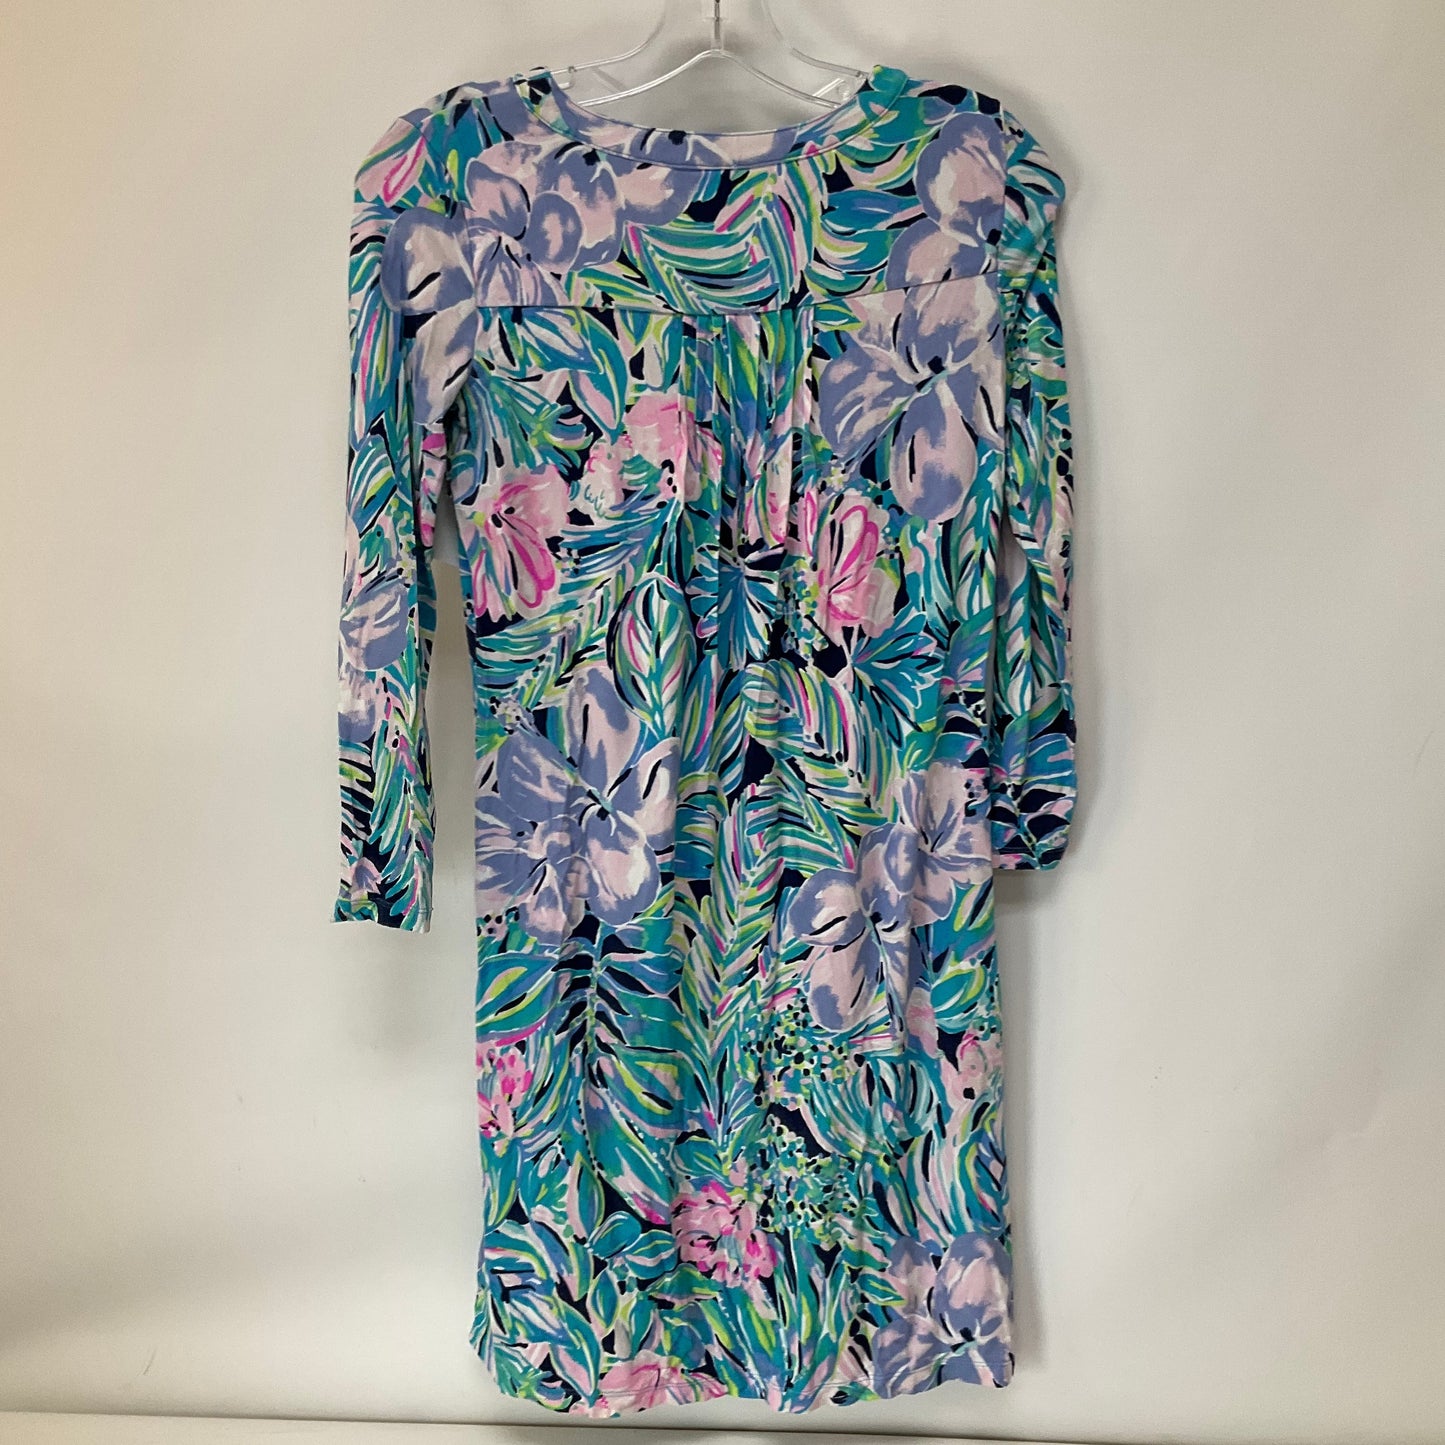 Multi-colored Dress Casual Short Lilly Pulitzer, Size Xxs